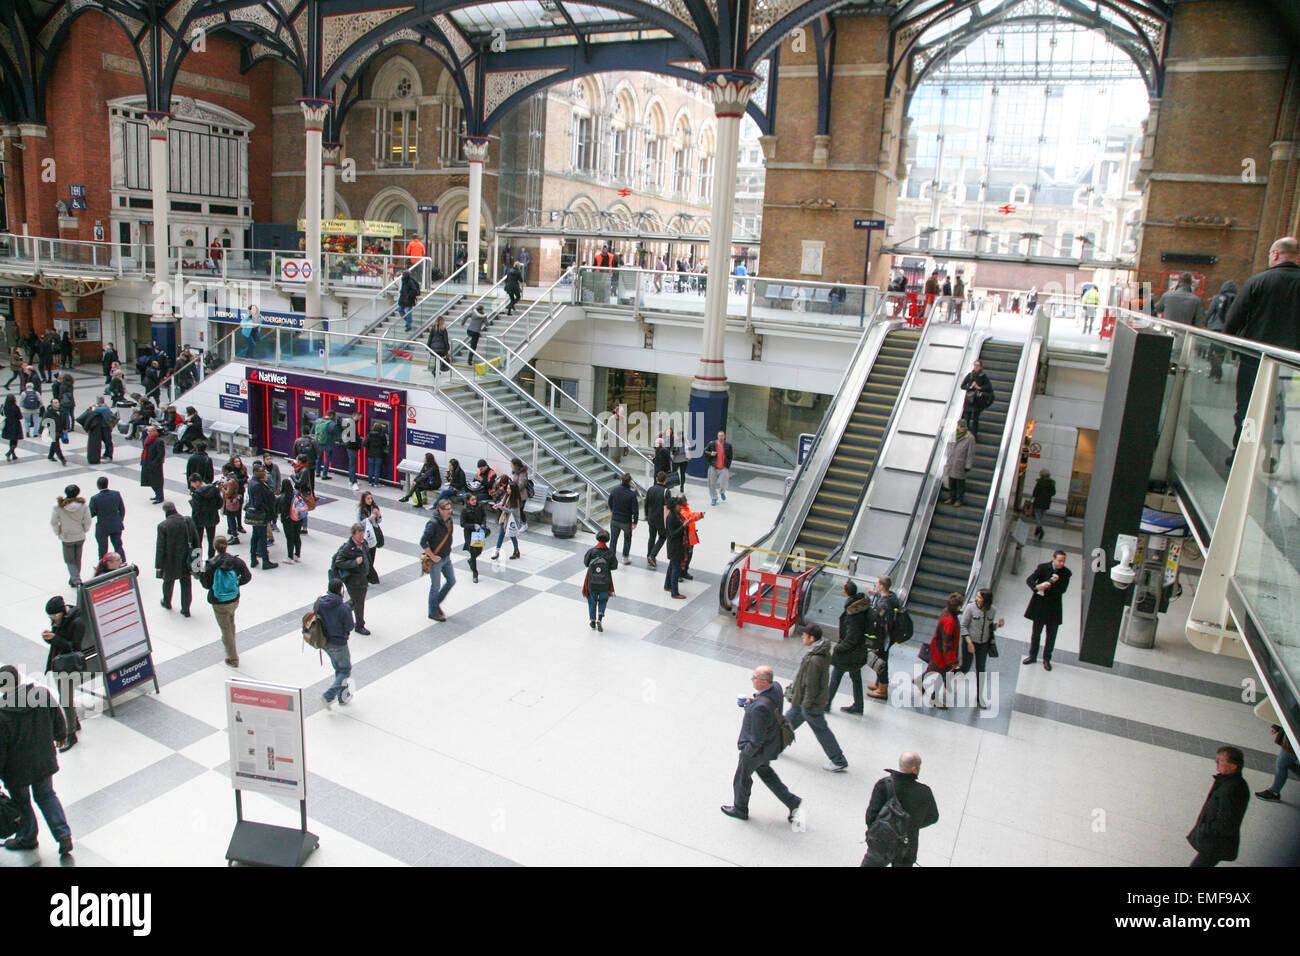 Scene at Liverpool Street Station, with regular commuters, London, England Stock Photo